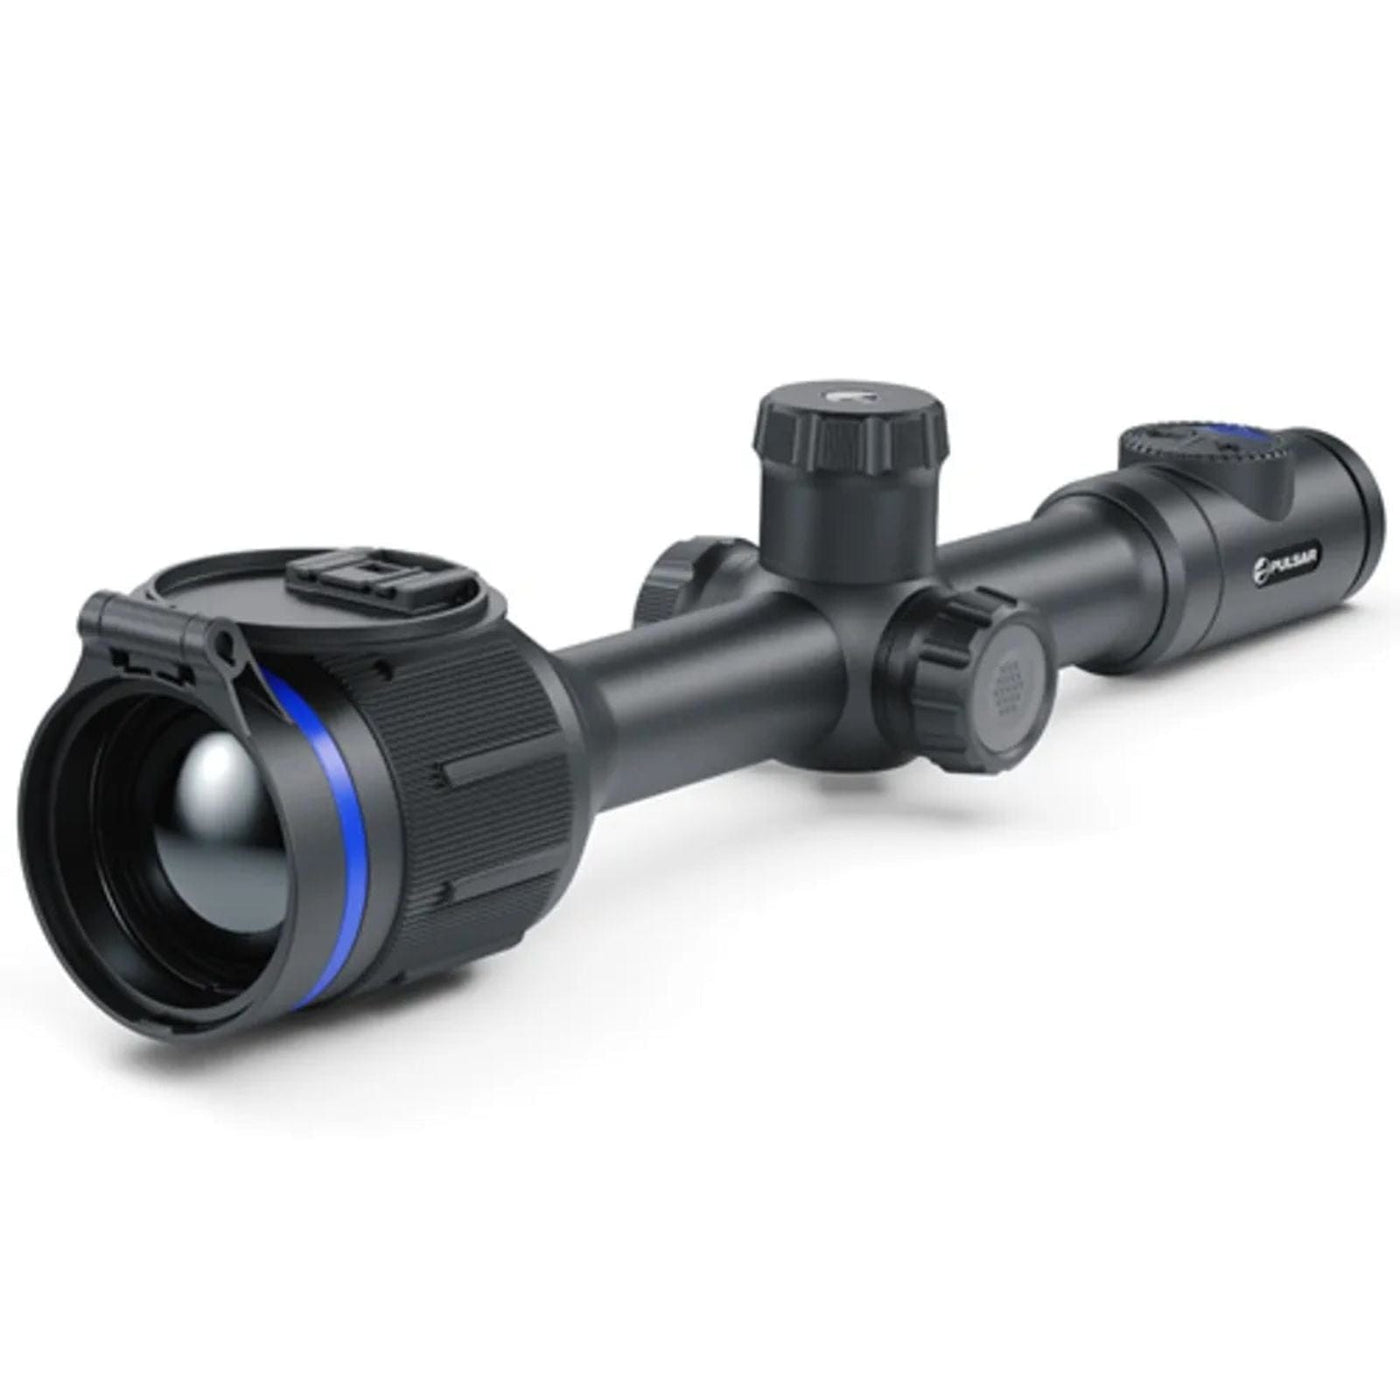 Pulsar Pulsar Thermion 2 XQ38 Thermal Riflescope Nightvision And Thermal